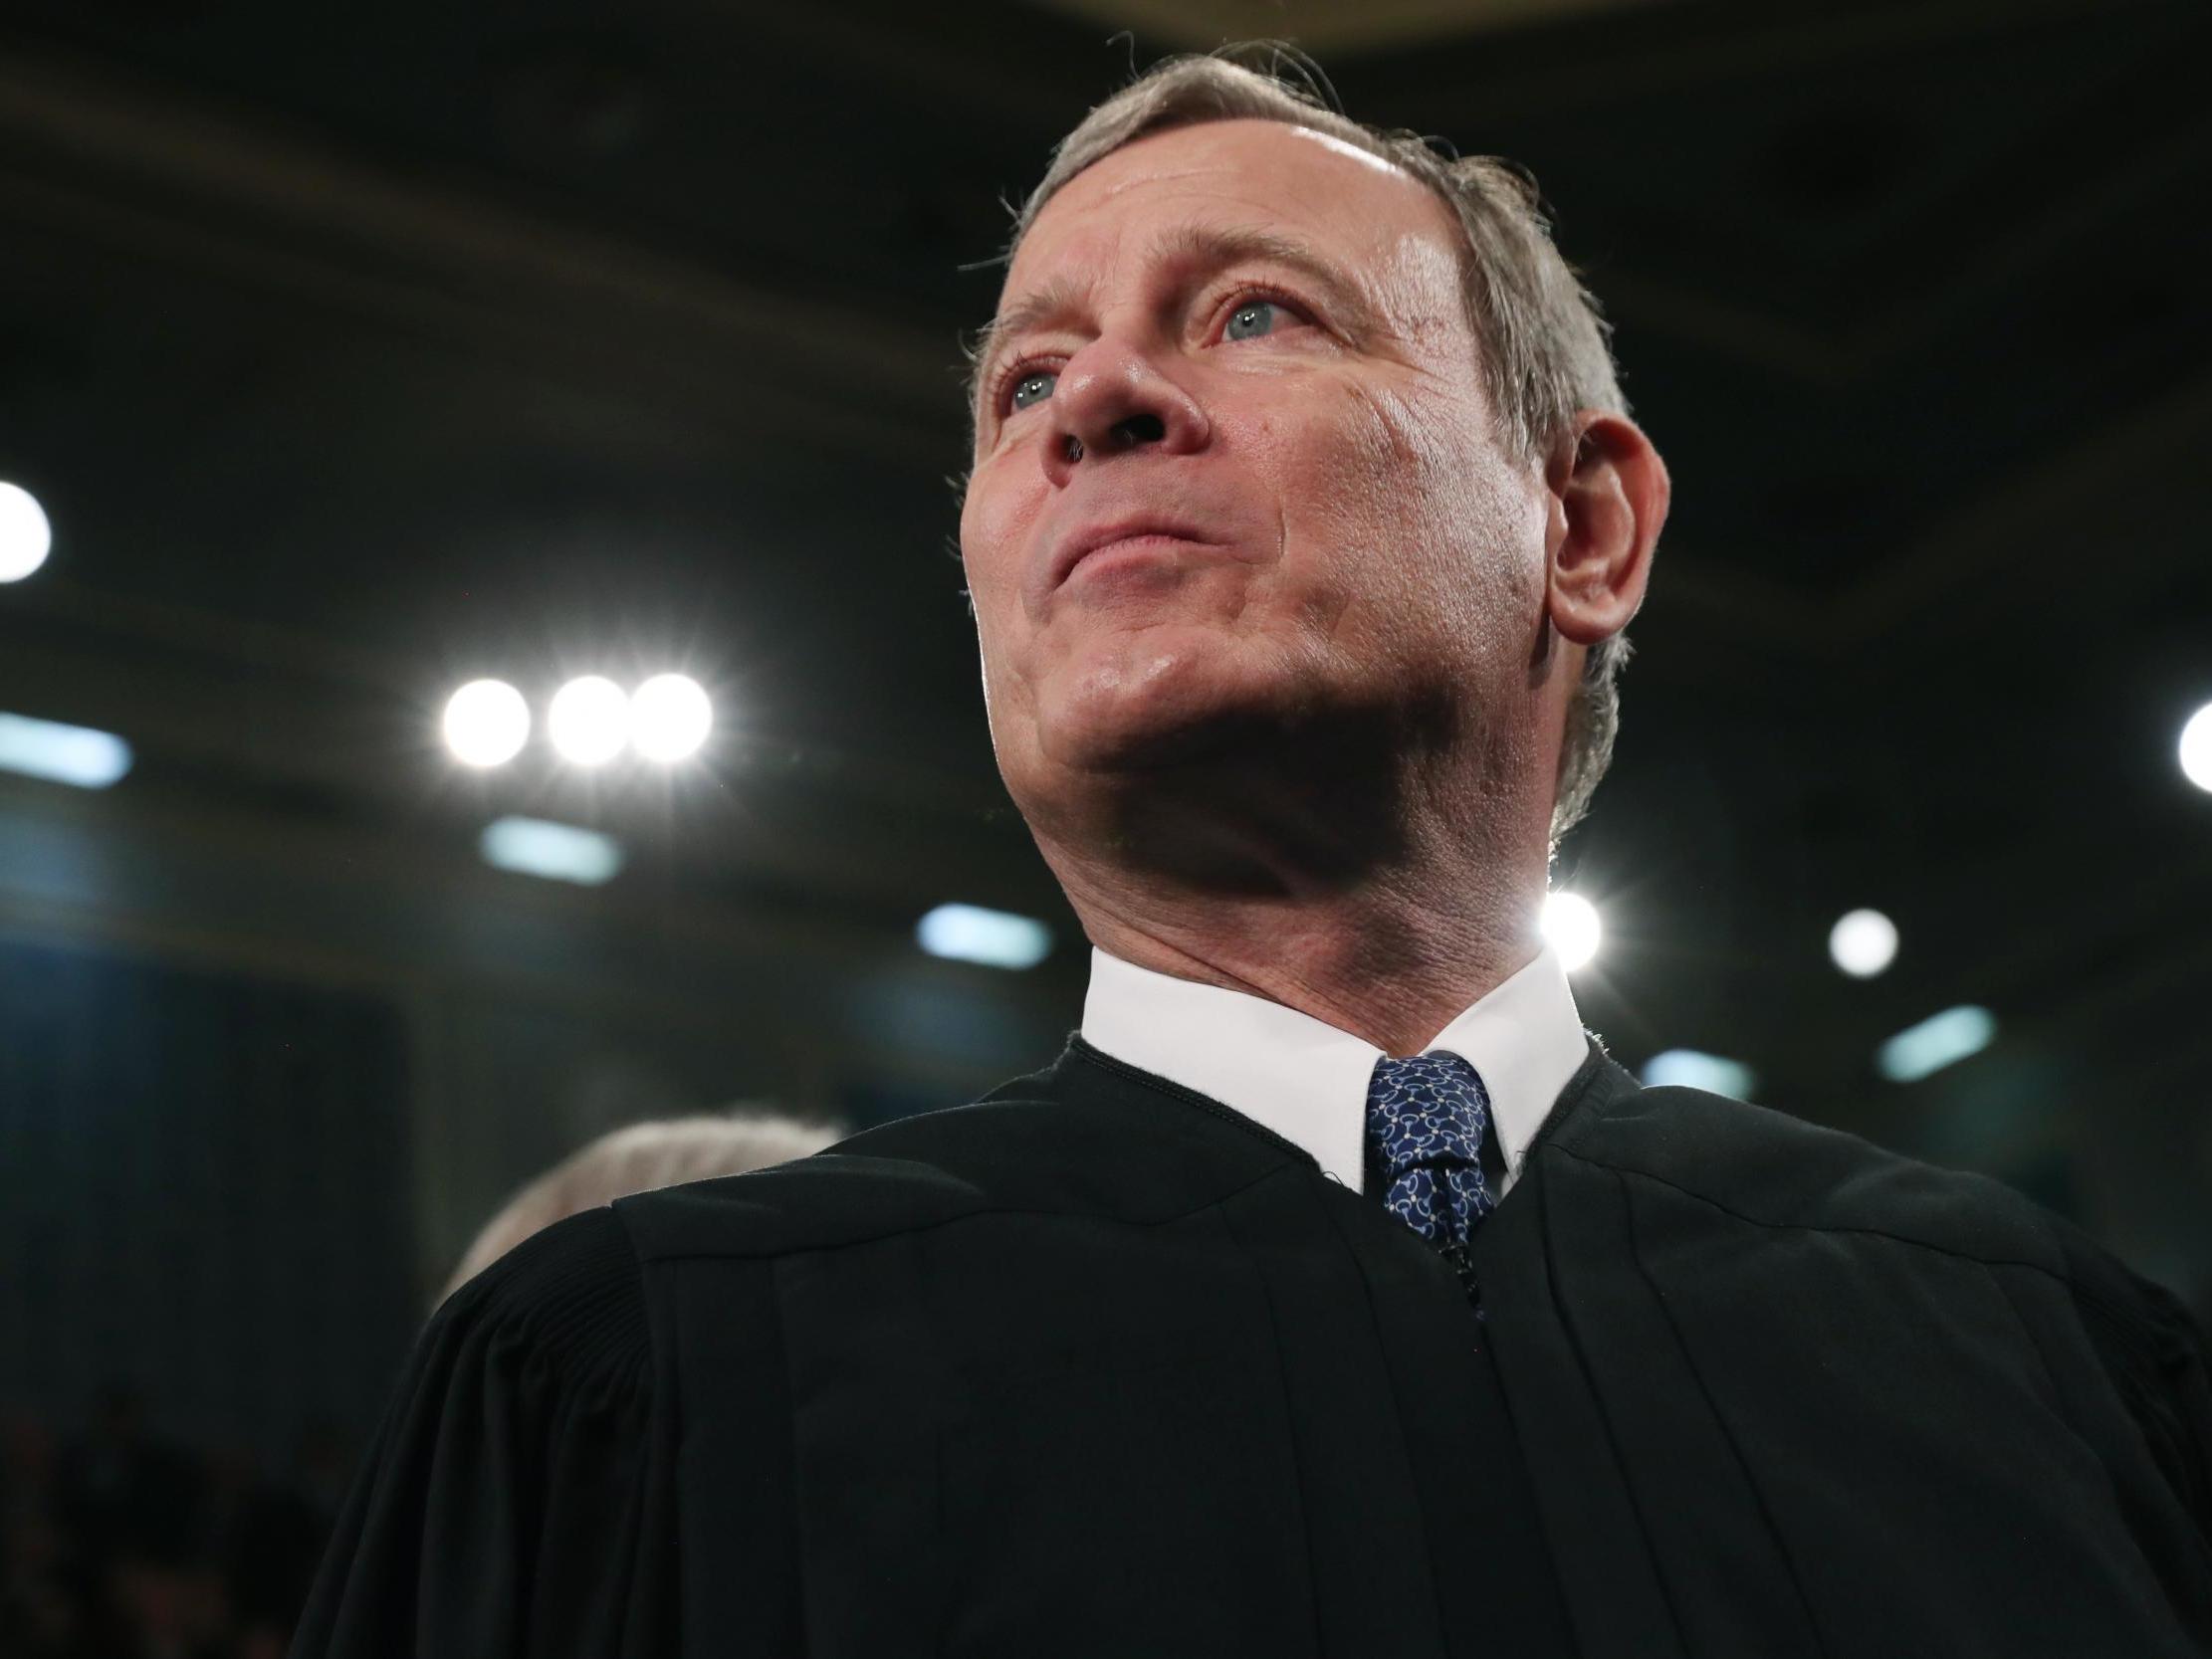 Justice Roberts sided with liberals this time to stop abortion rights being effectively ended in Louisiana